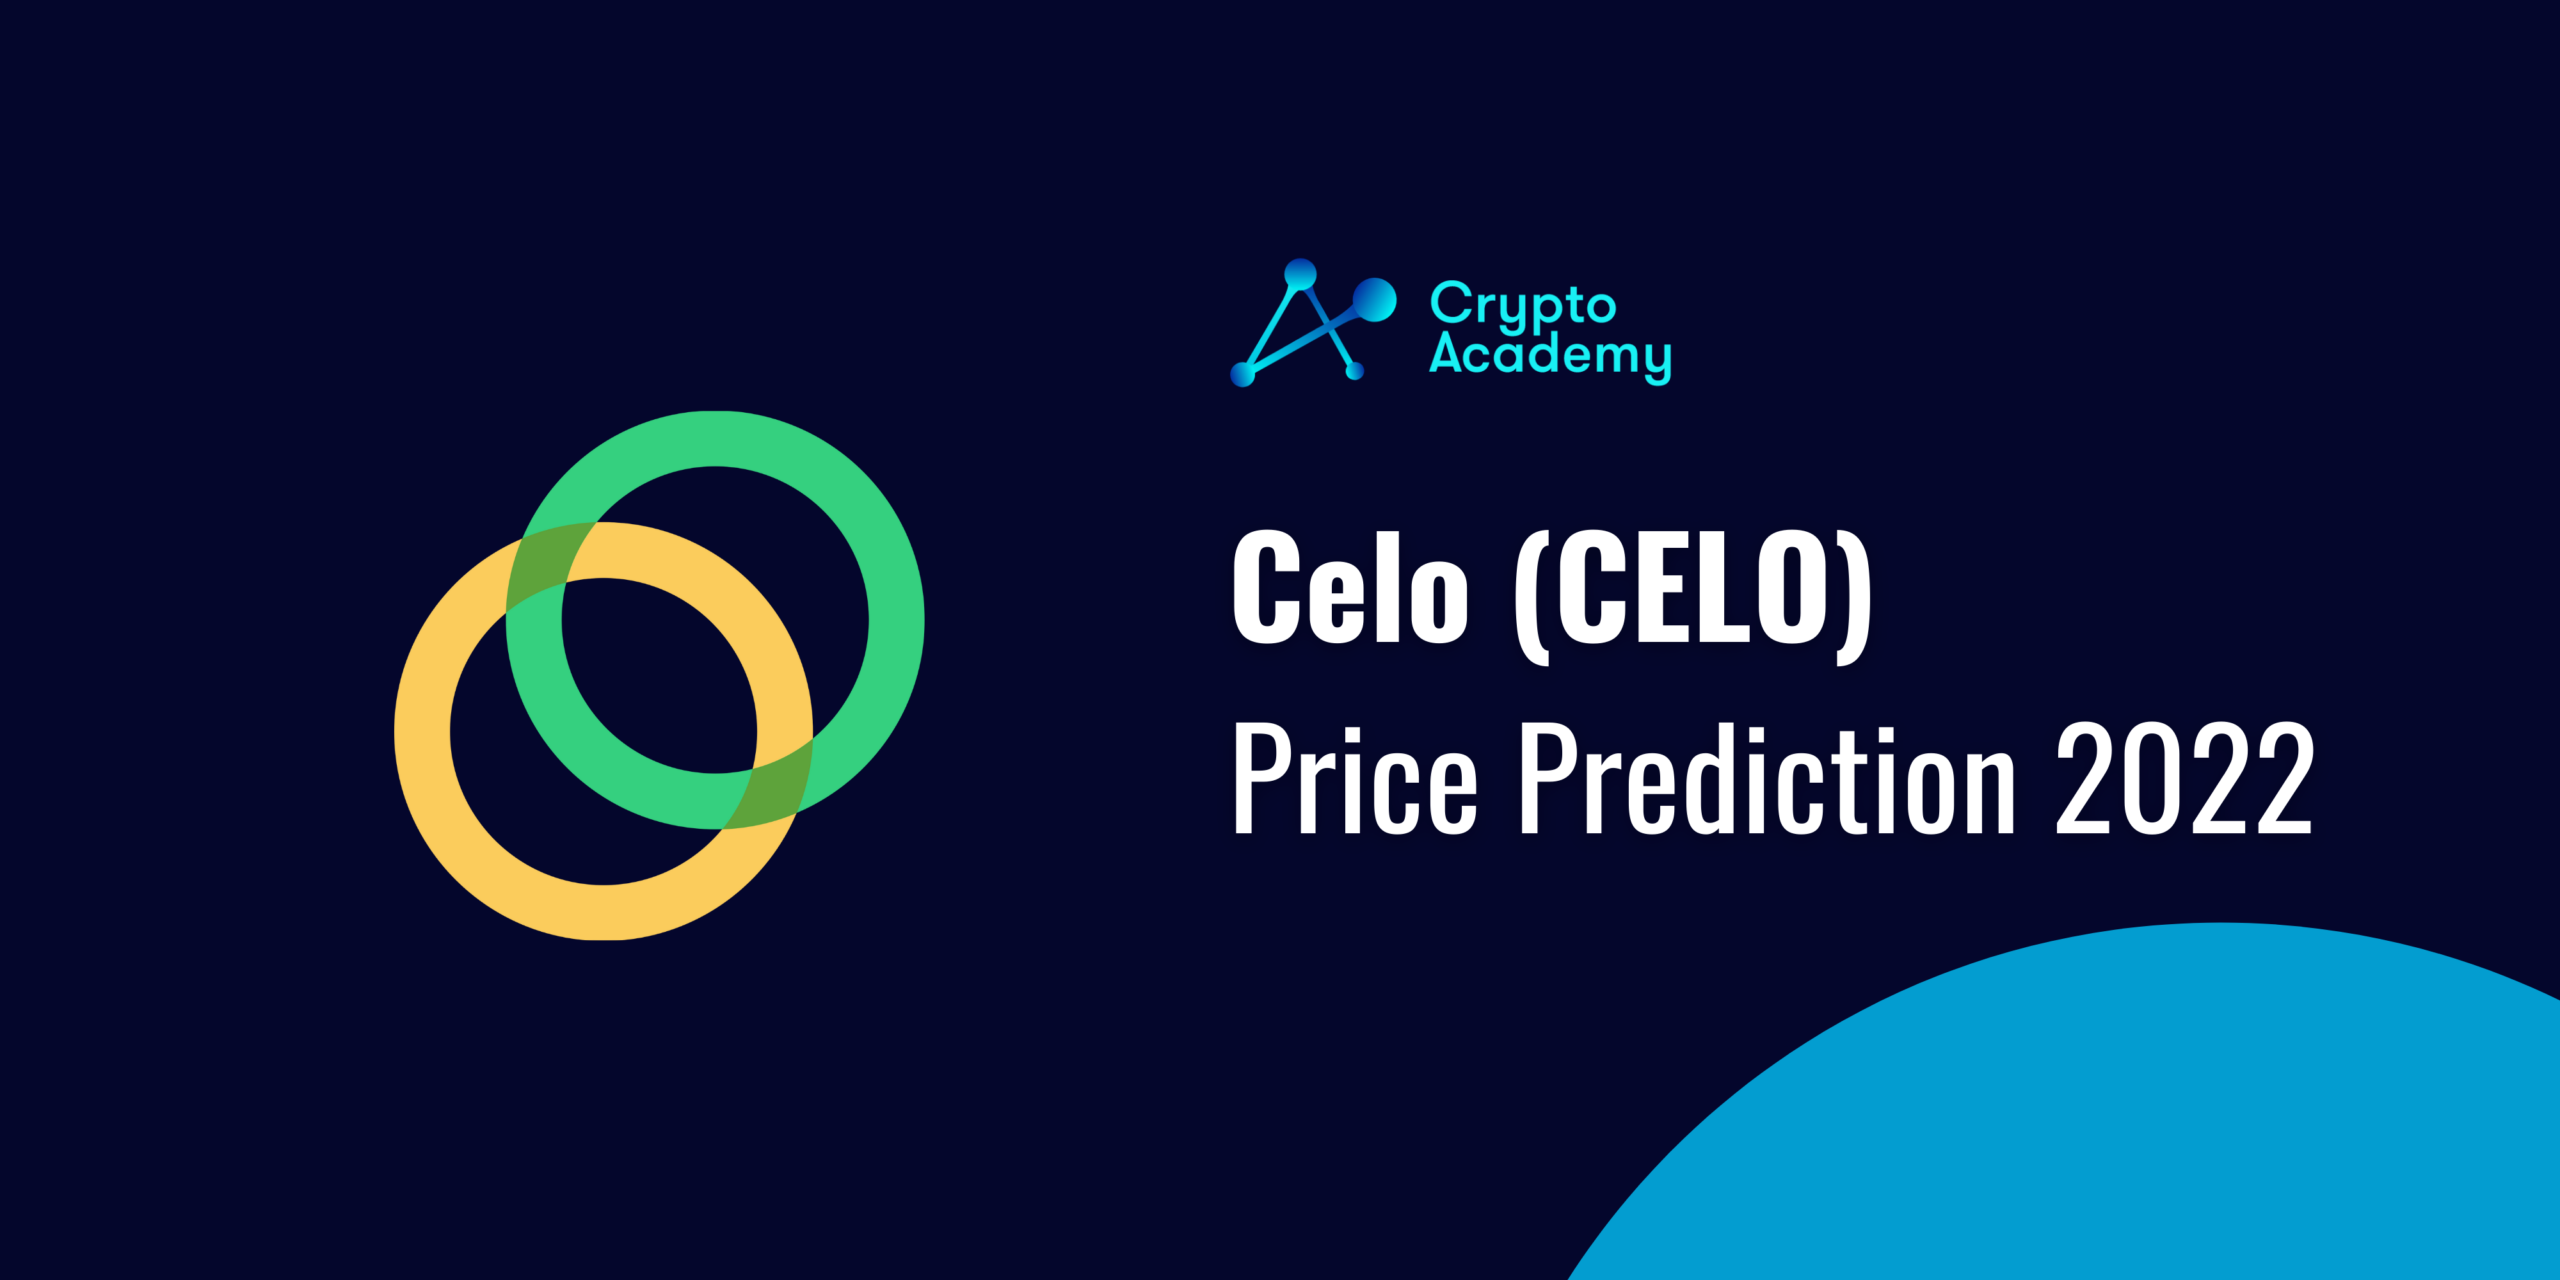 Celo Price Prediction 2022 and Beyond - Could CELO Reach $100?